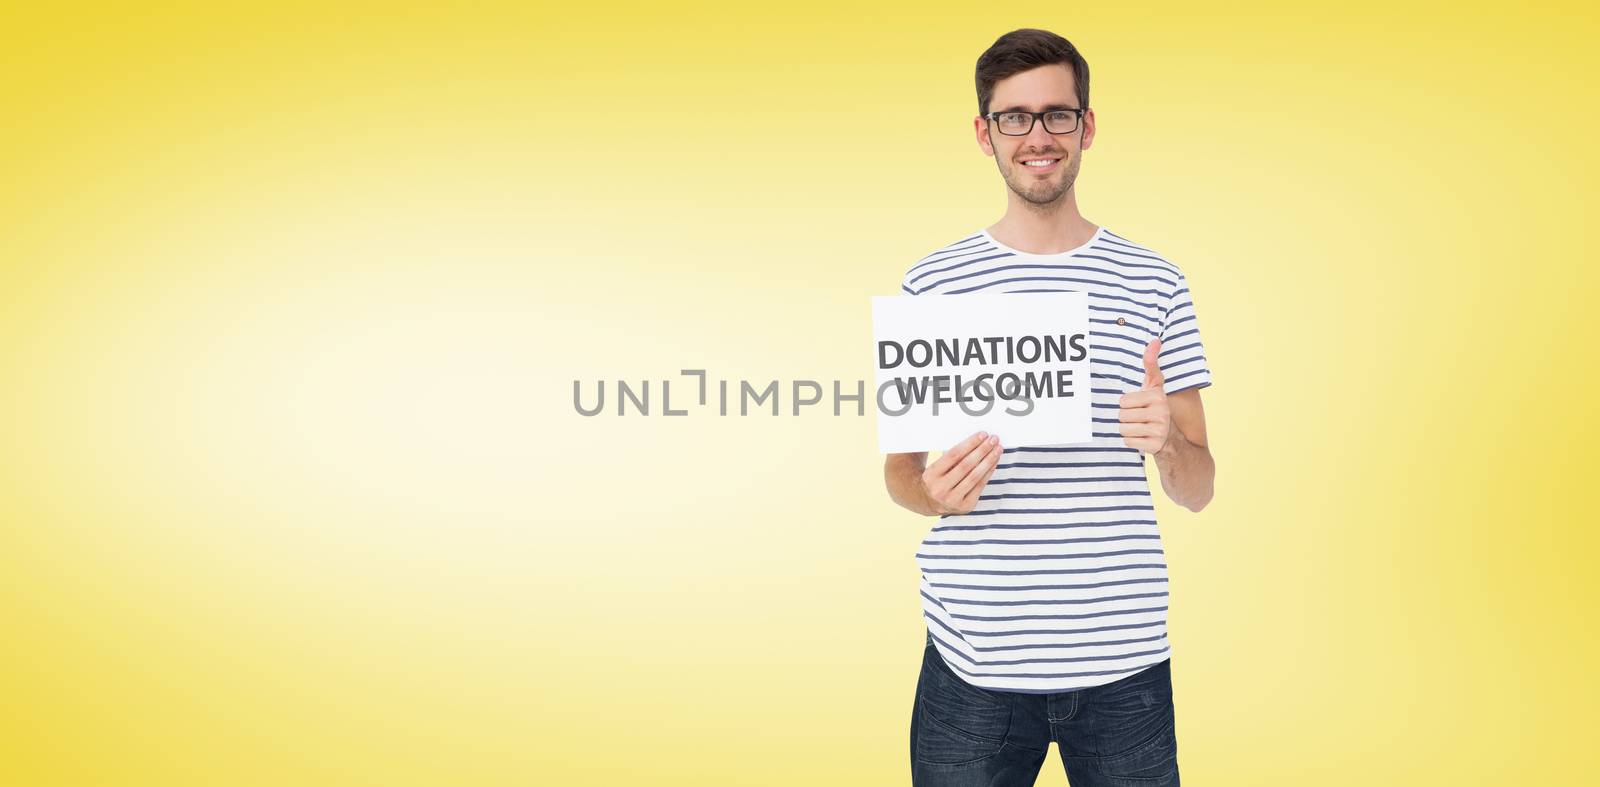 Man holding a donation welcome note while gesturing thumbs up against yellow vignette